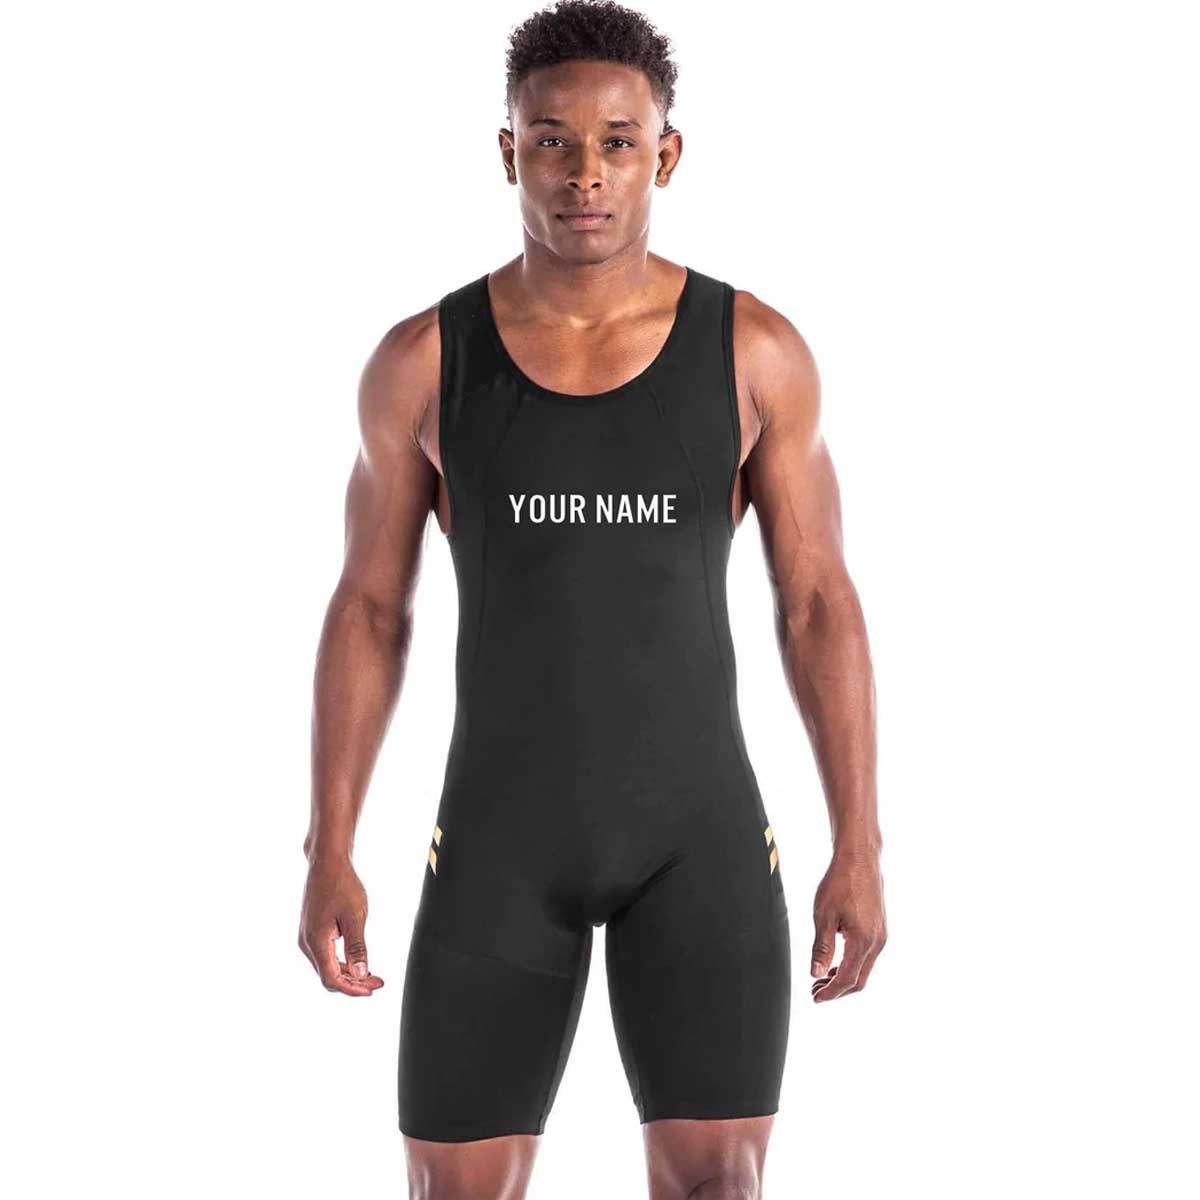 Singlets Manufacturers in France